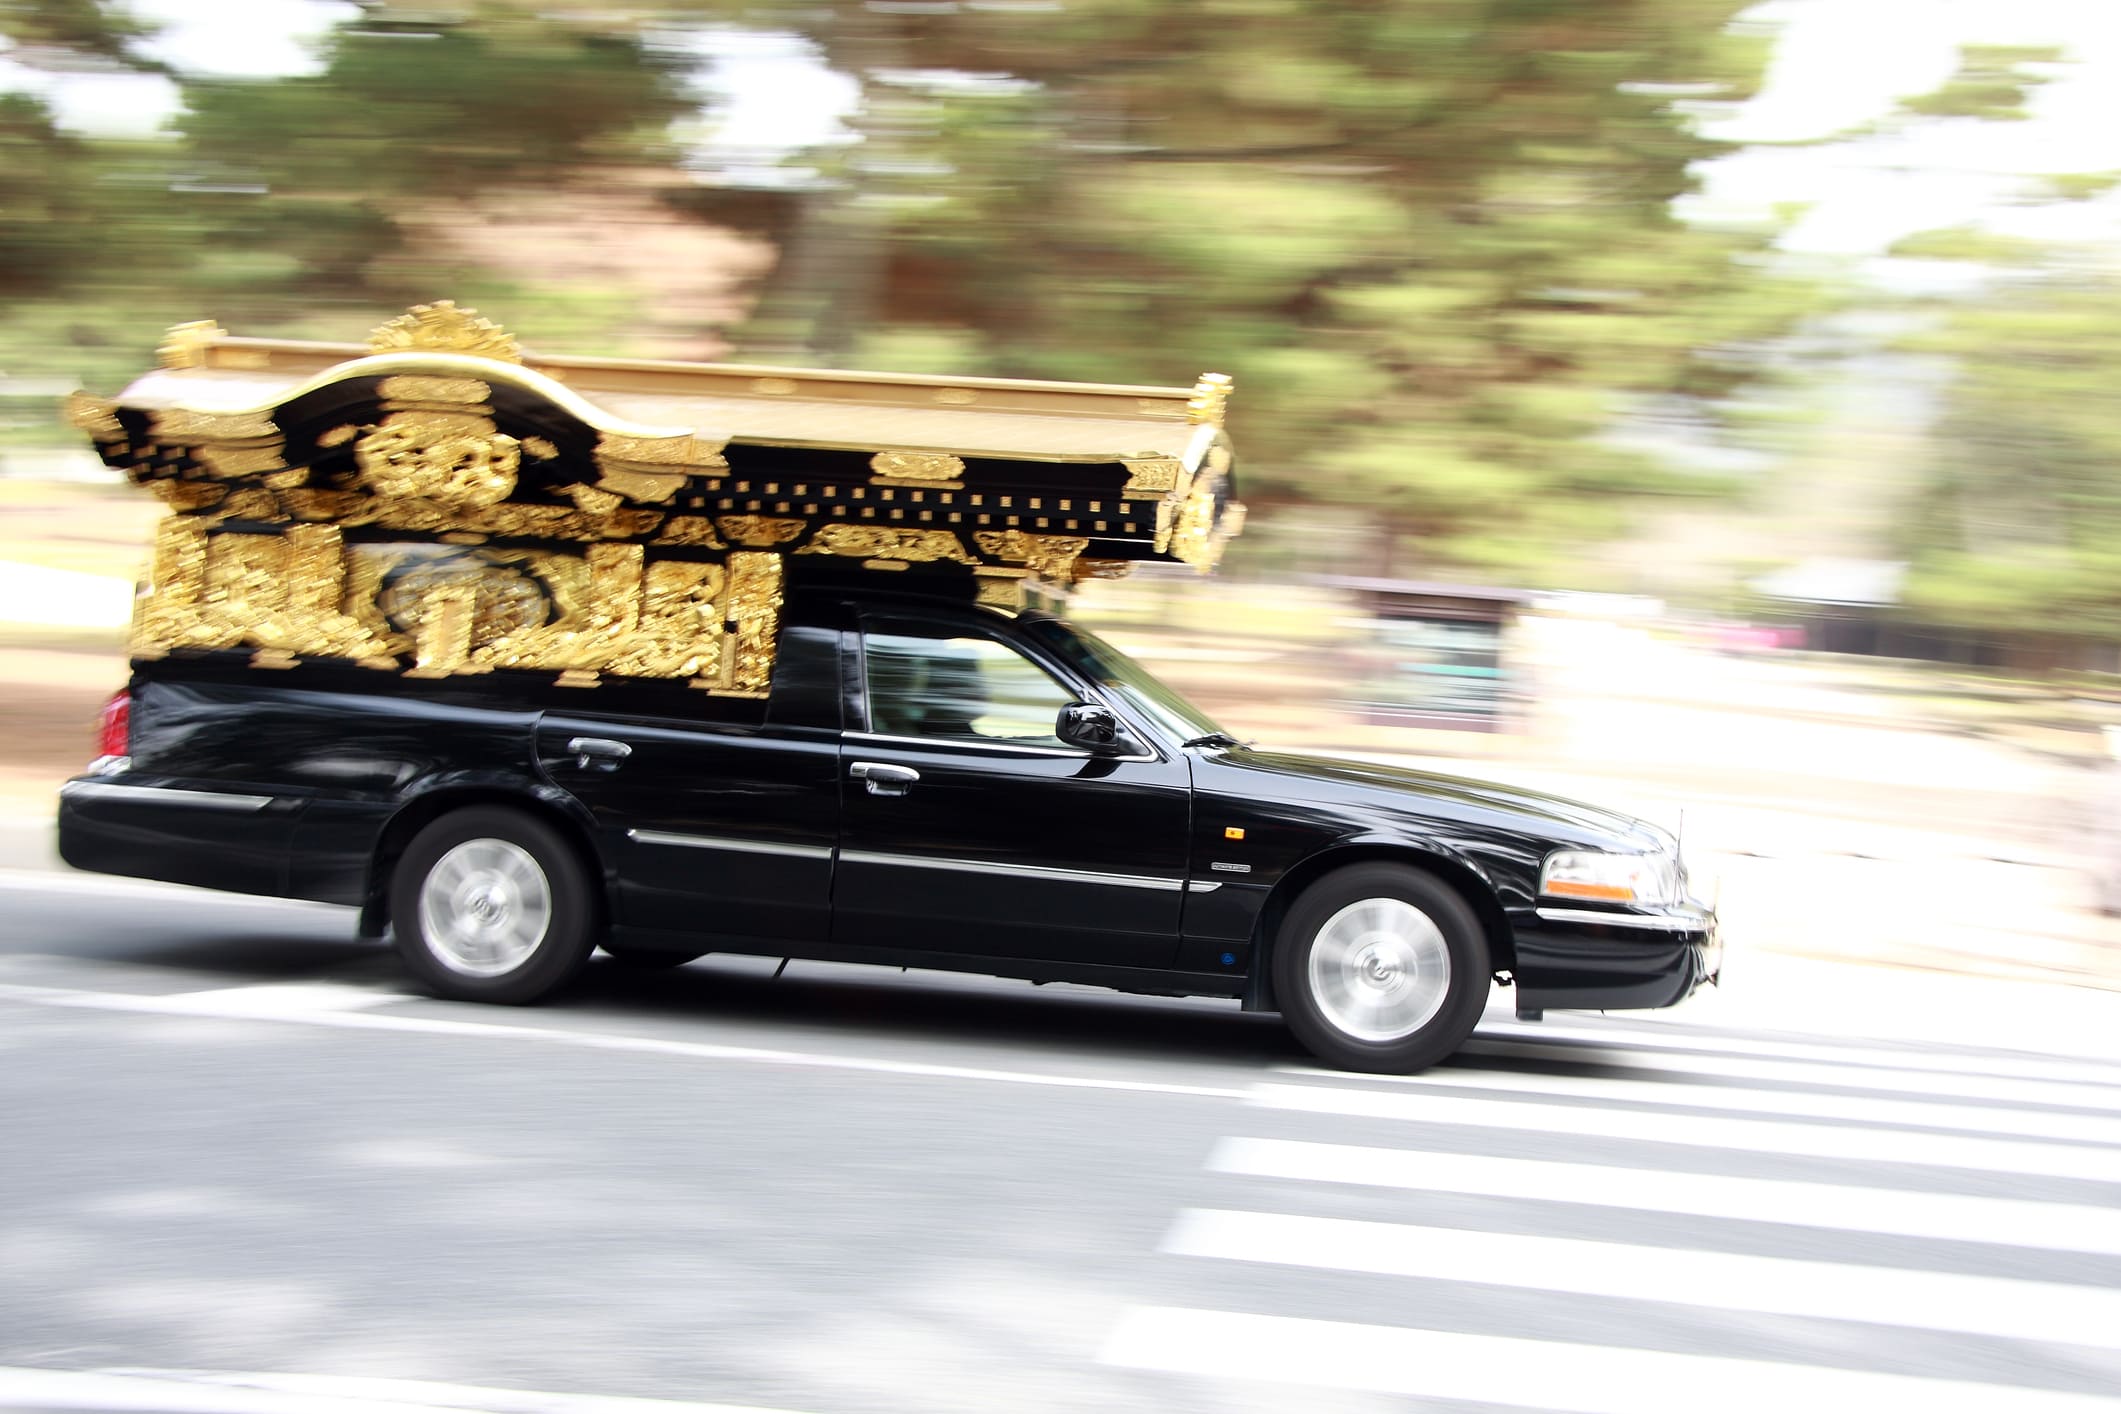 A Station Wagon turned into a Japanese Funeral Hearse